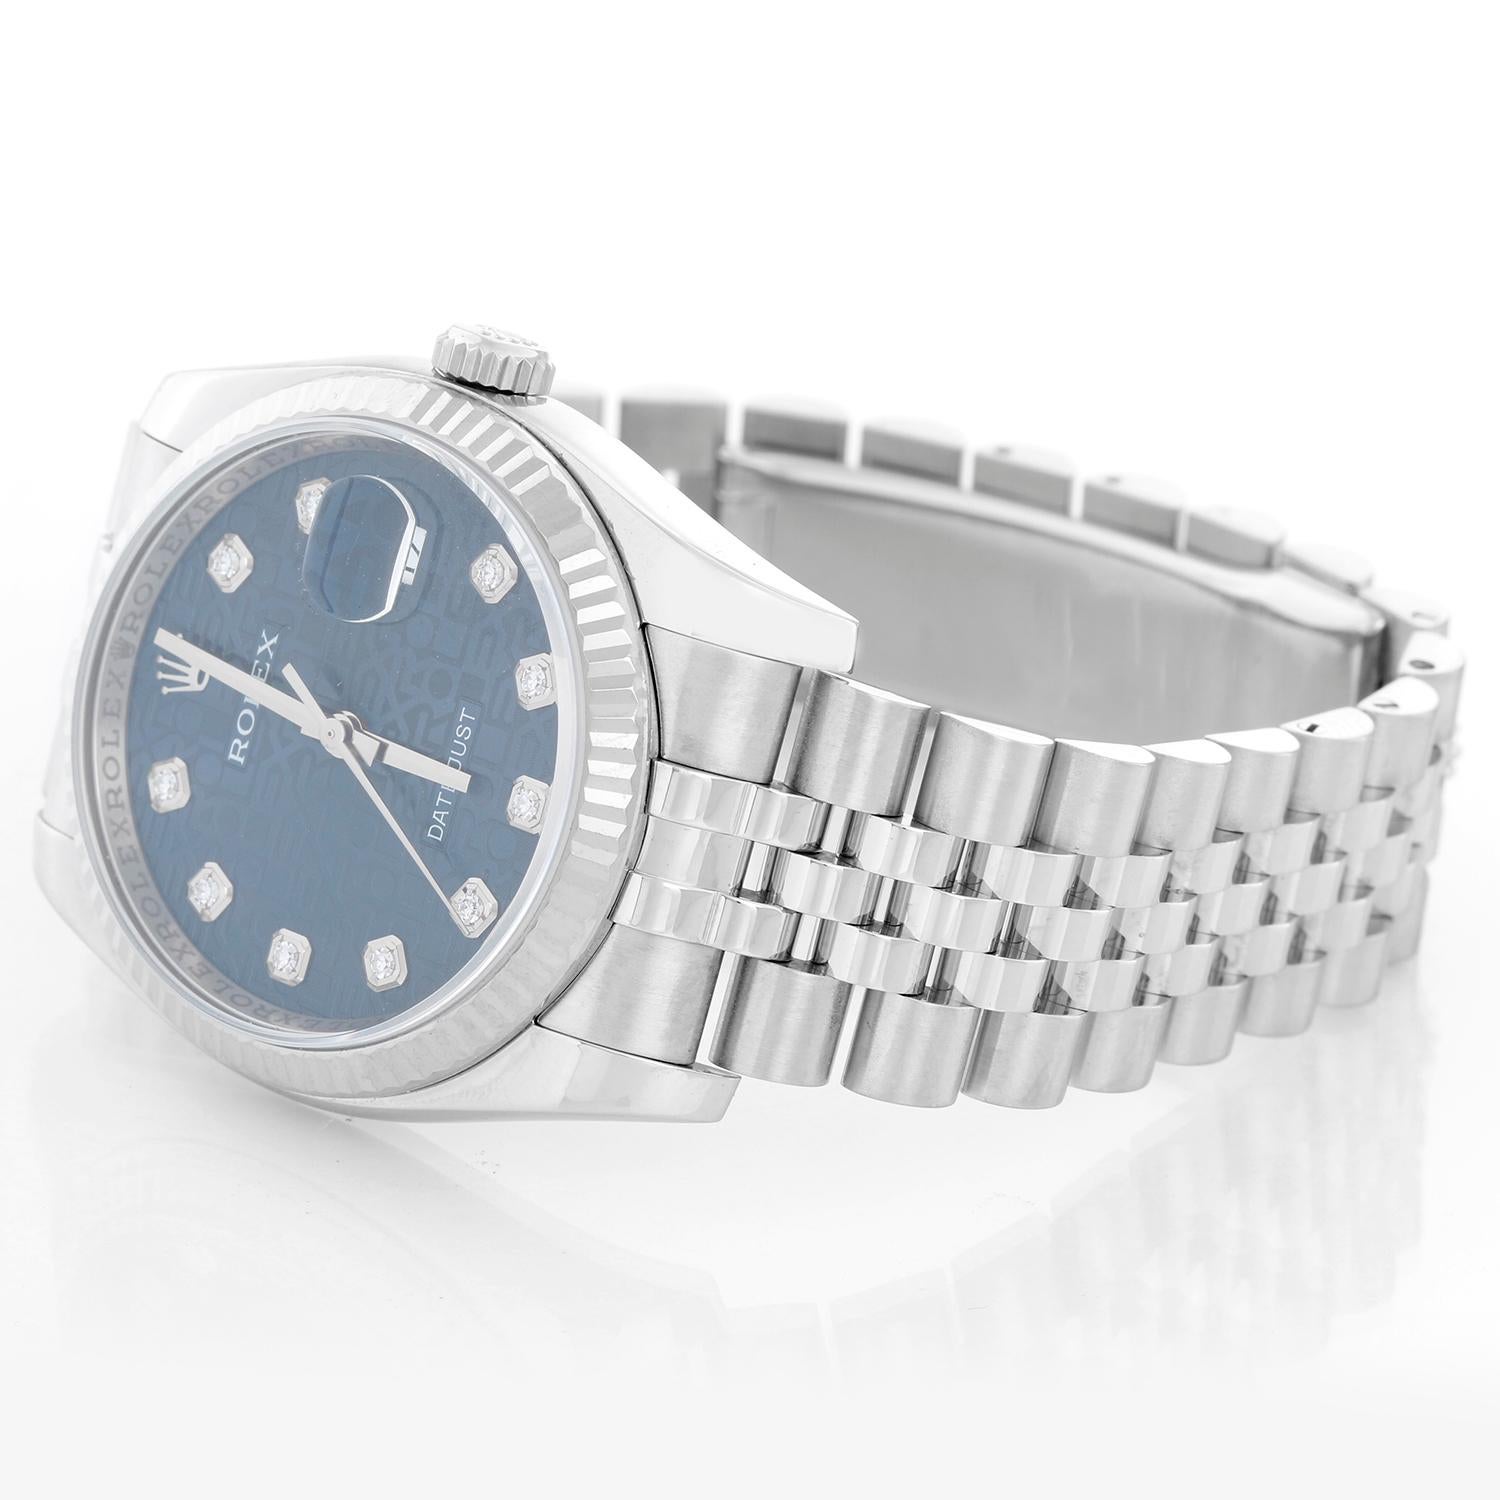 Rolex Datejust Men's Stainless Steel Watch 116234 - Automatic winding, 31 jewels, Quickset, sapphire crystal. Stainless steel case with 18k white gold fluted bezel . Blue jubilee dial with diamonds . Stainless steel hidden-clasp Jubilee bracelet